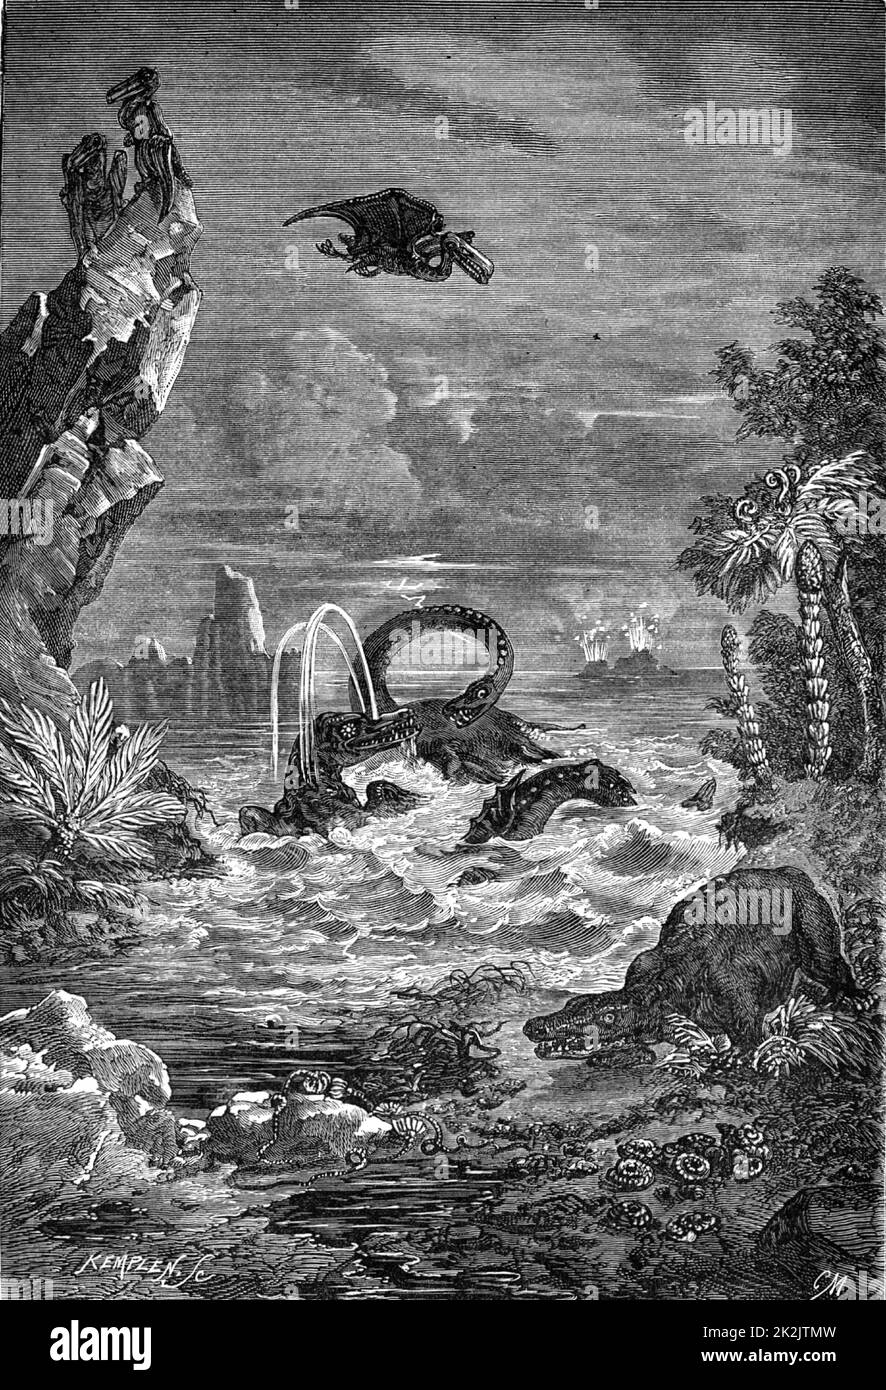 Imaginative reconstruction of the Earth during the time of the dinosaurs. From 'Astronomie Populaire' by Camille Flammarion (Paris, 1881). Engraving. Stock Photo